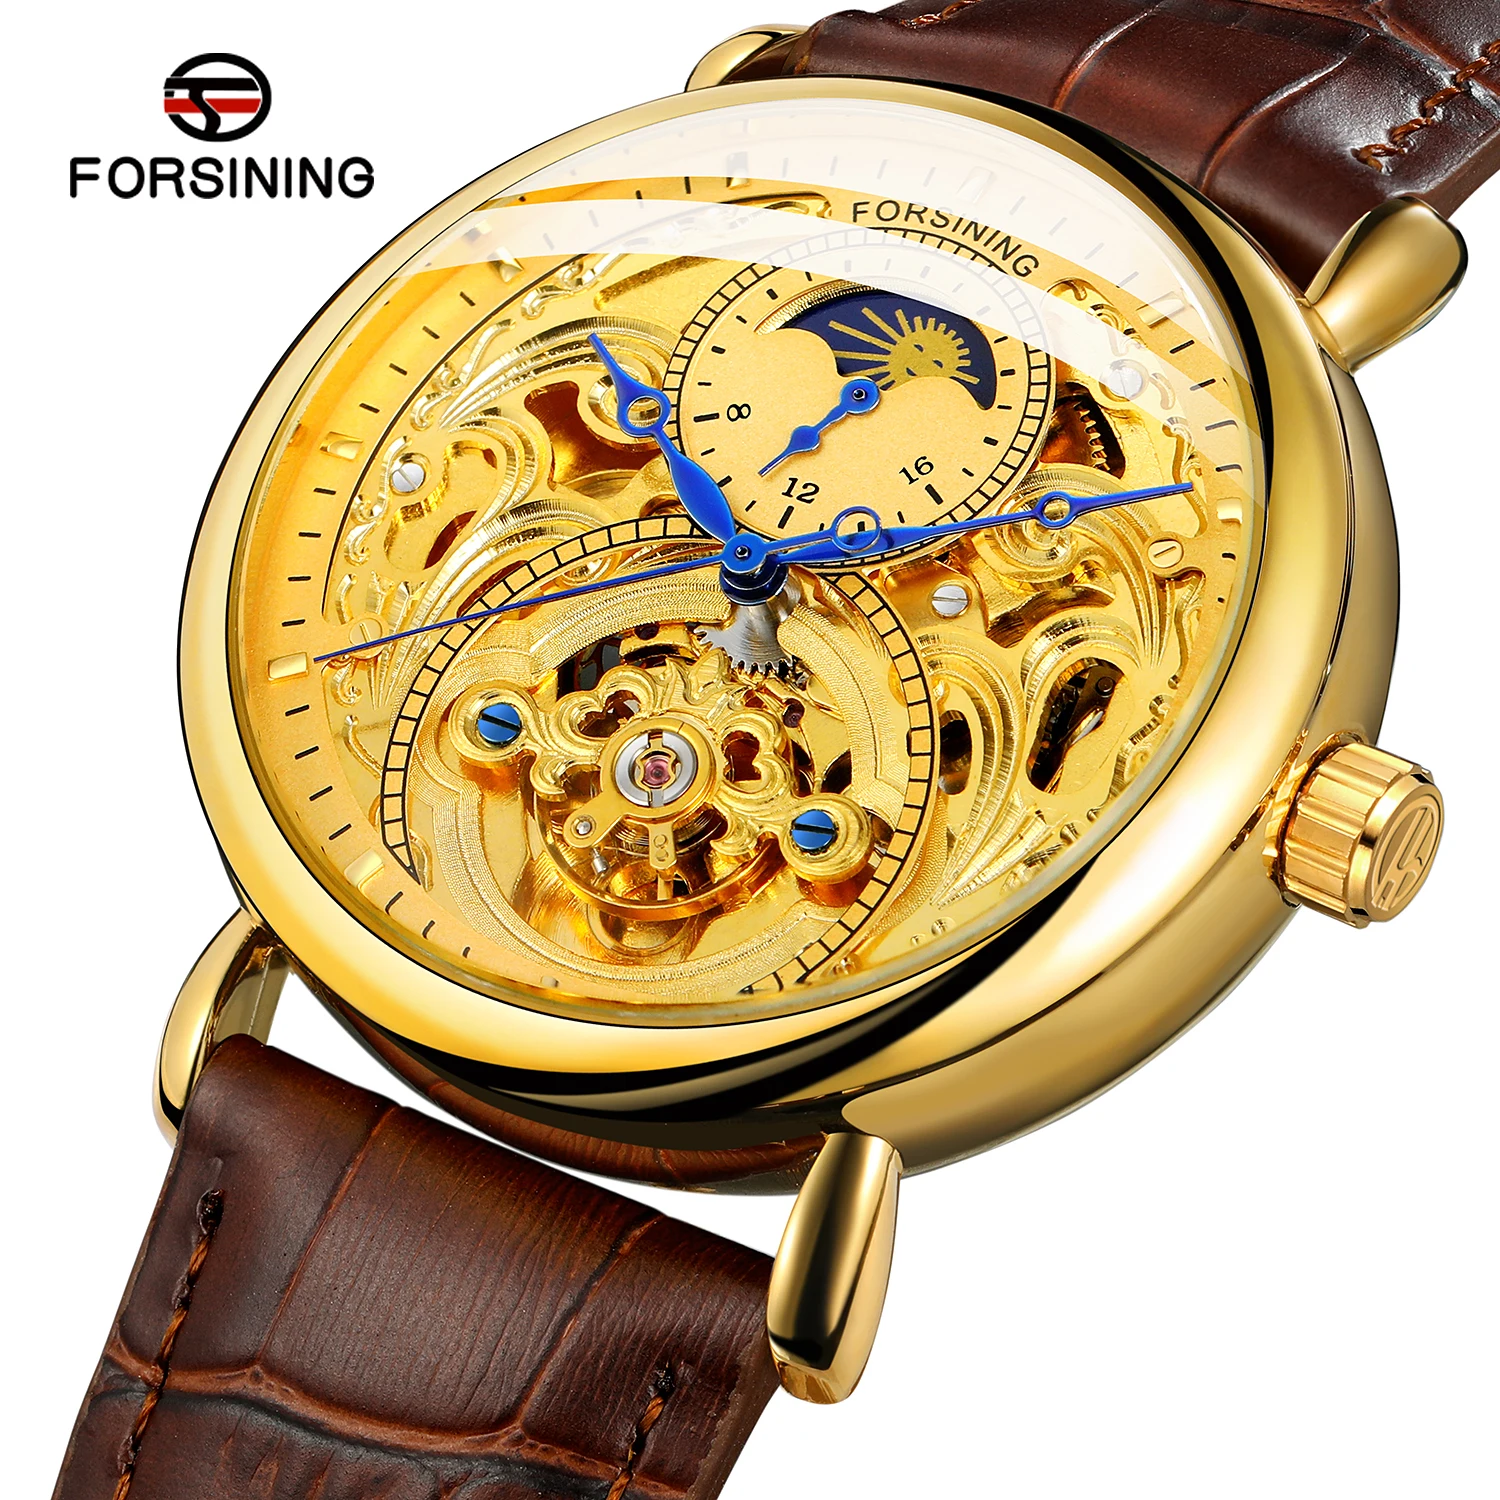 

Forsining Top Brand Automatic Mechanical Business Watch Mens Clock Golden Moon Phase Leather Wrist Watches Relogio Masculino